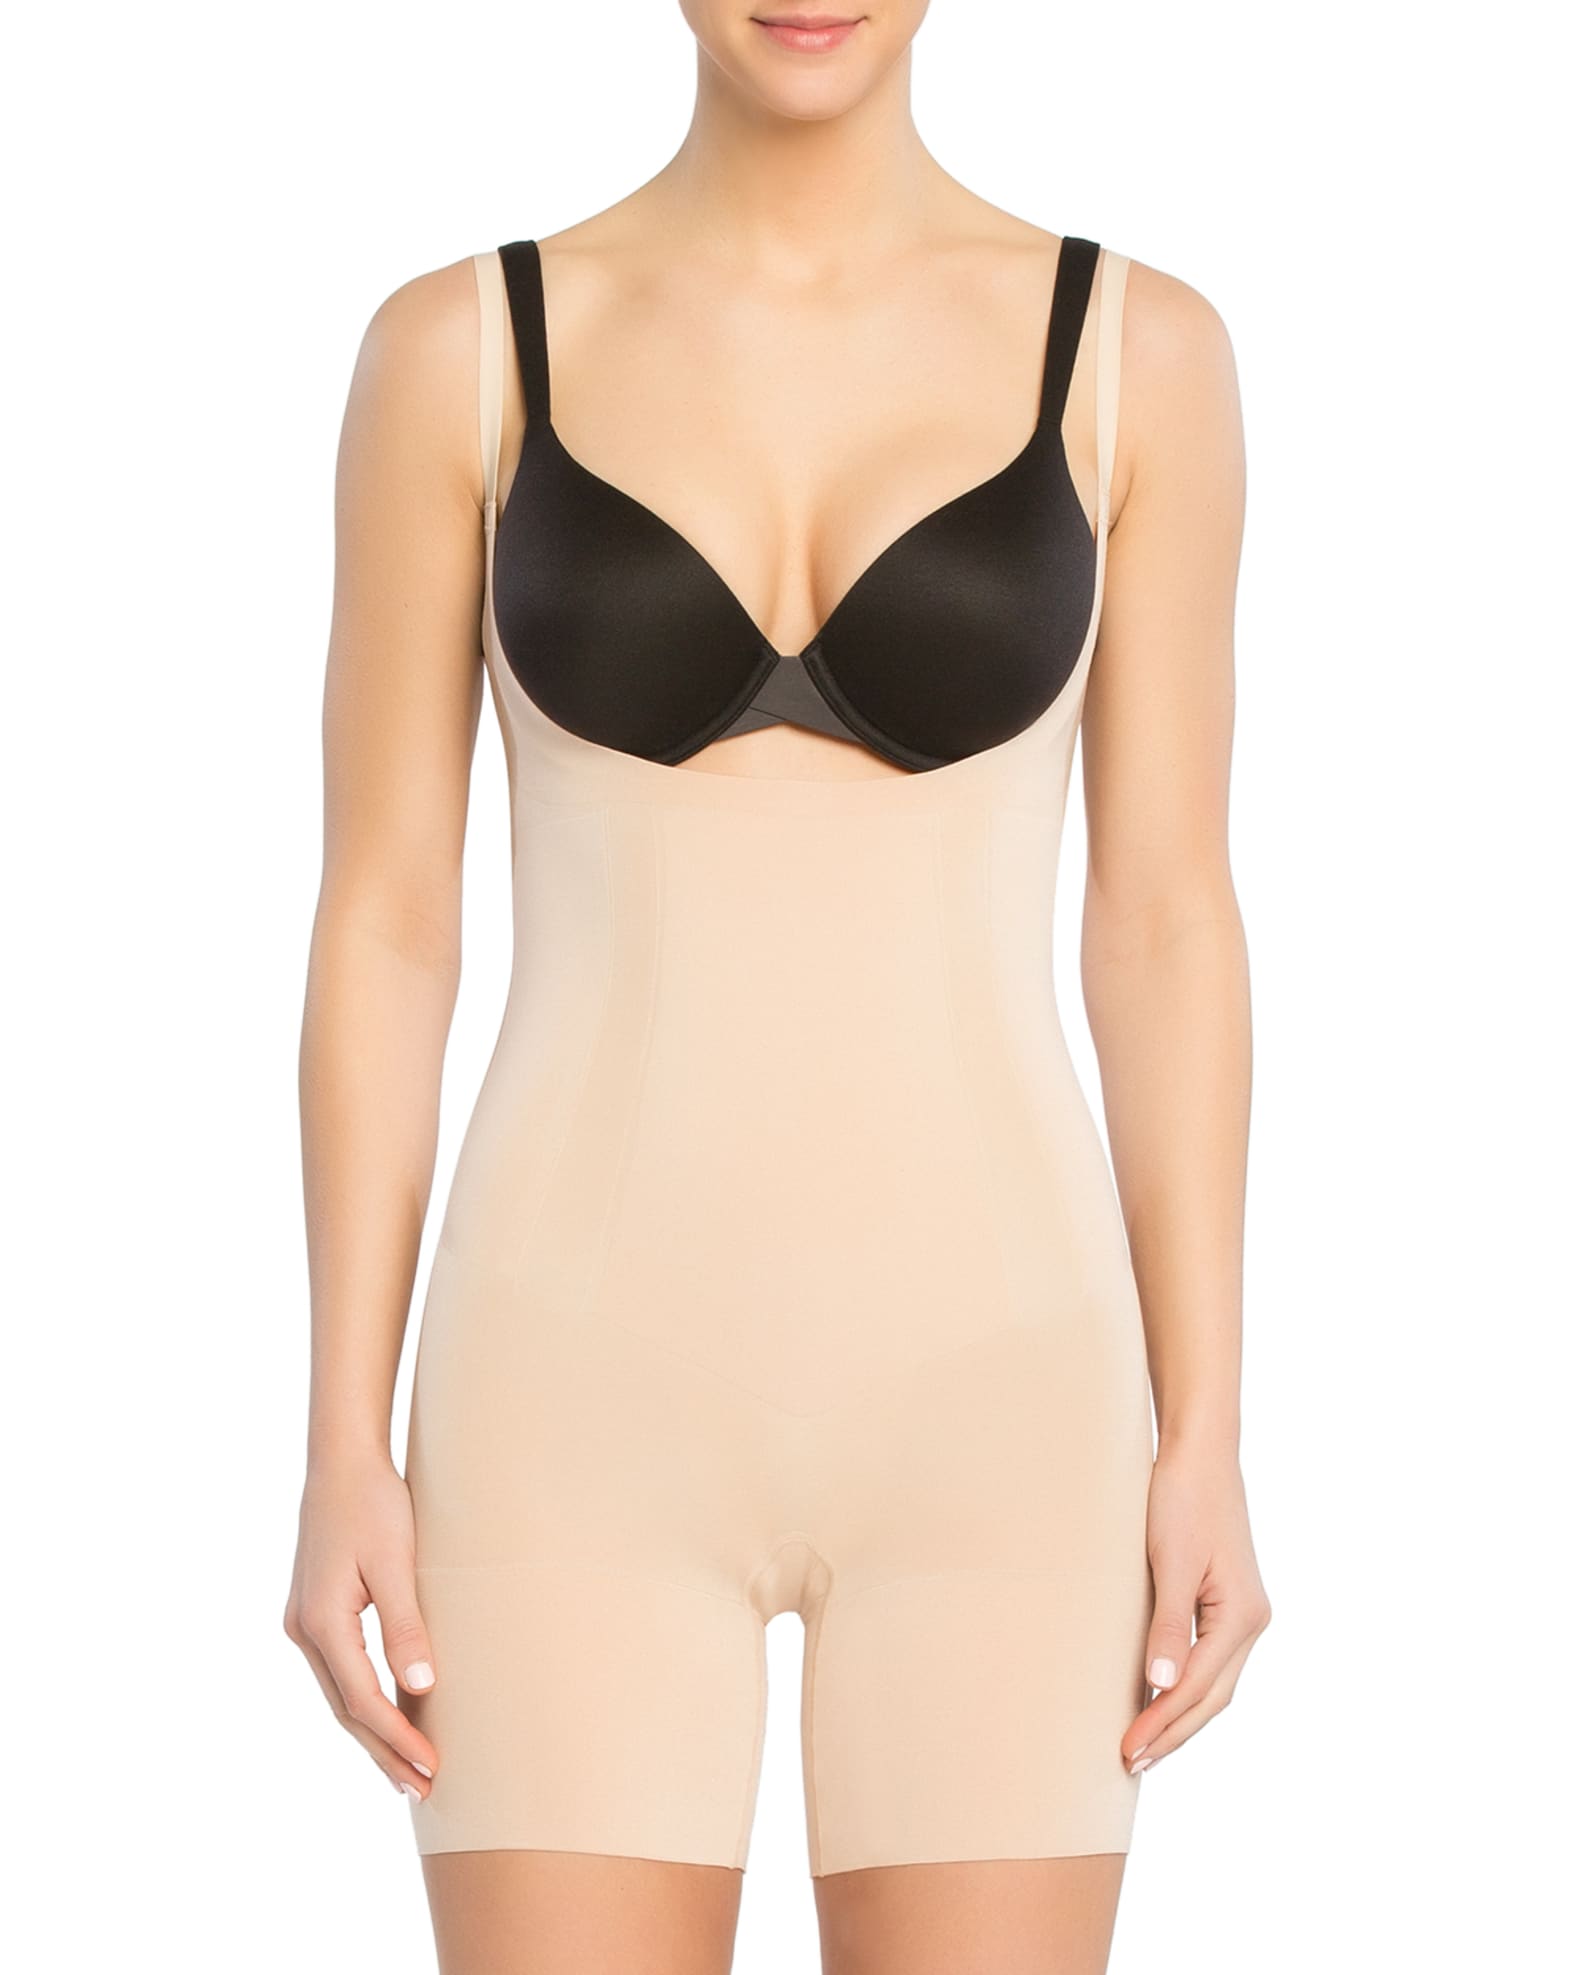 OnCore open-bust mid-thigh bodysuit, Spanx